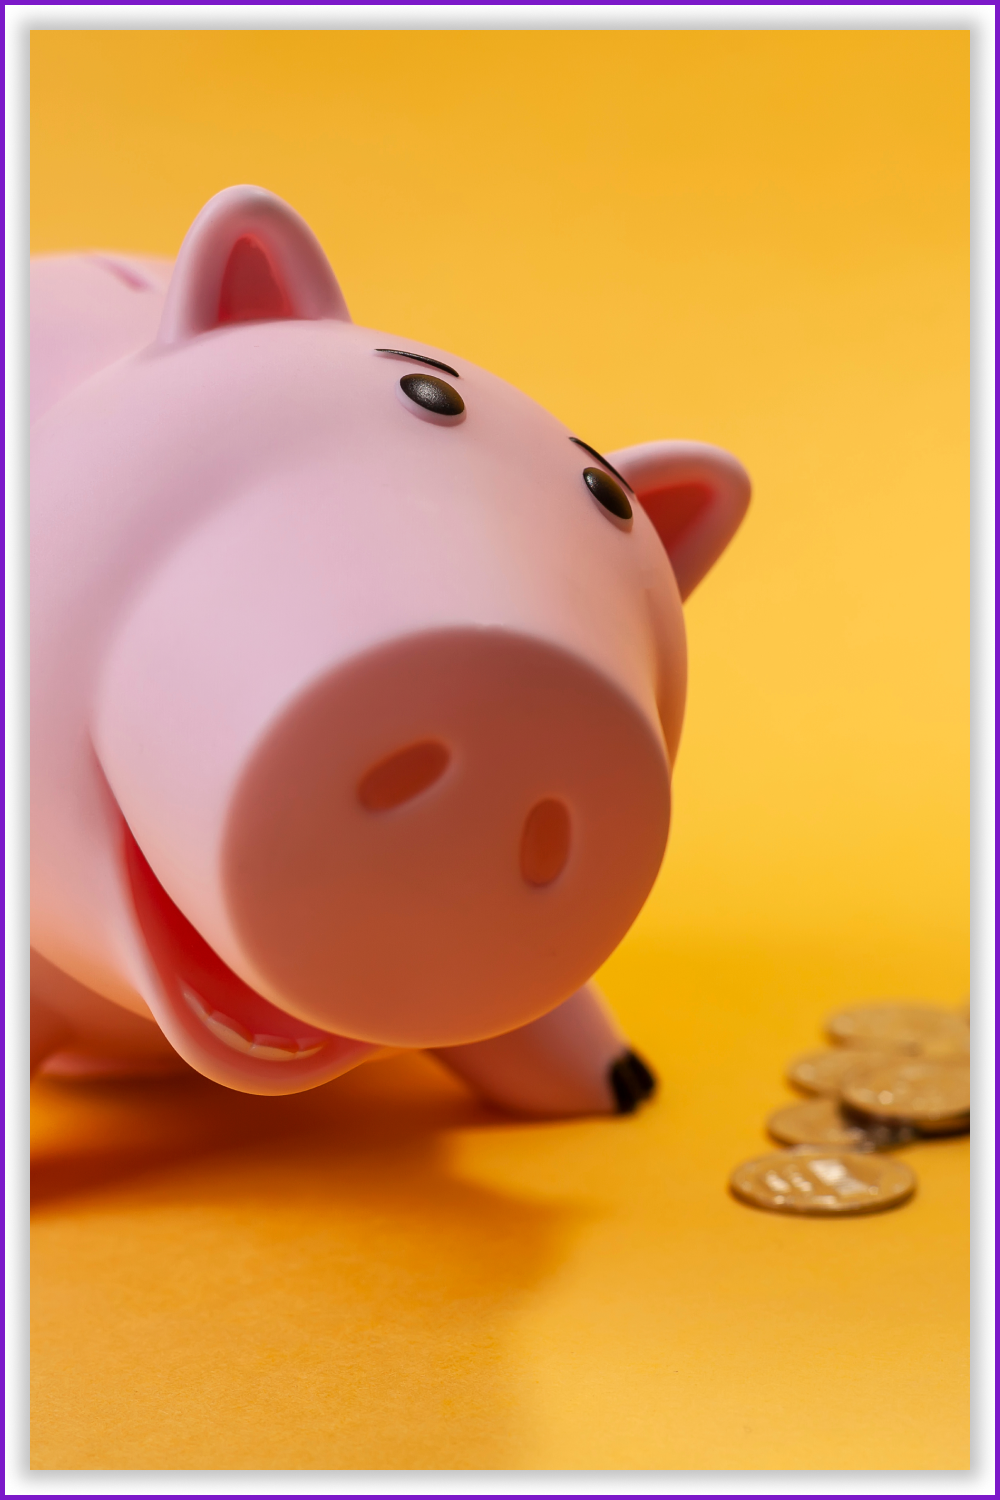 The smiling piggy bank with coins on the yellow background.